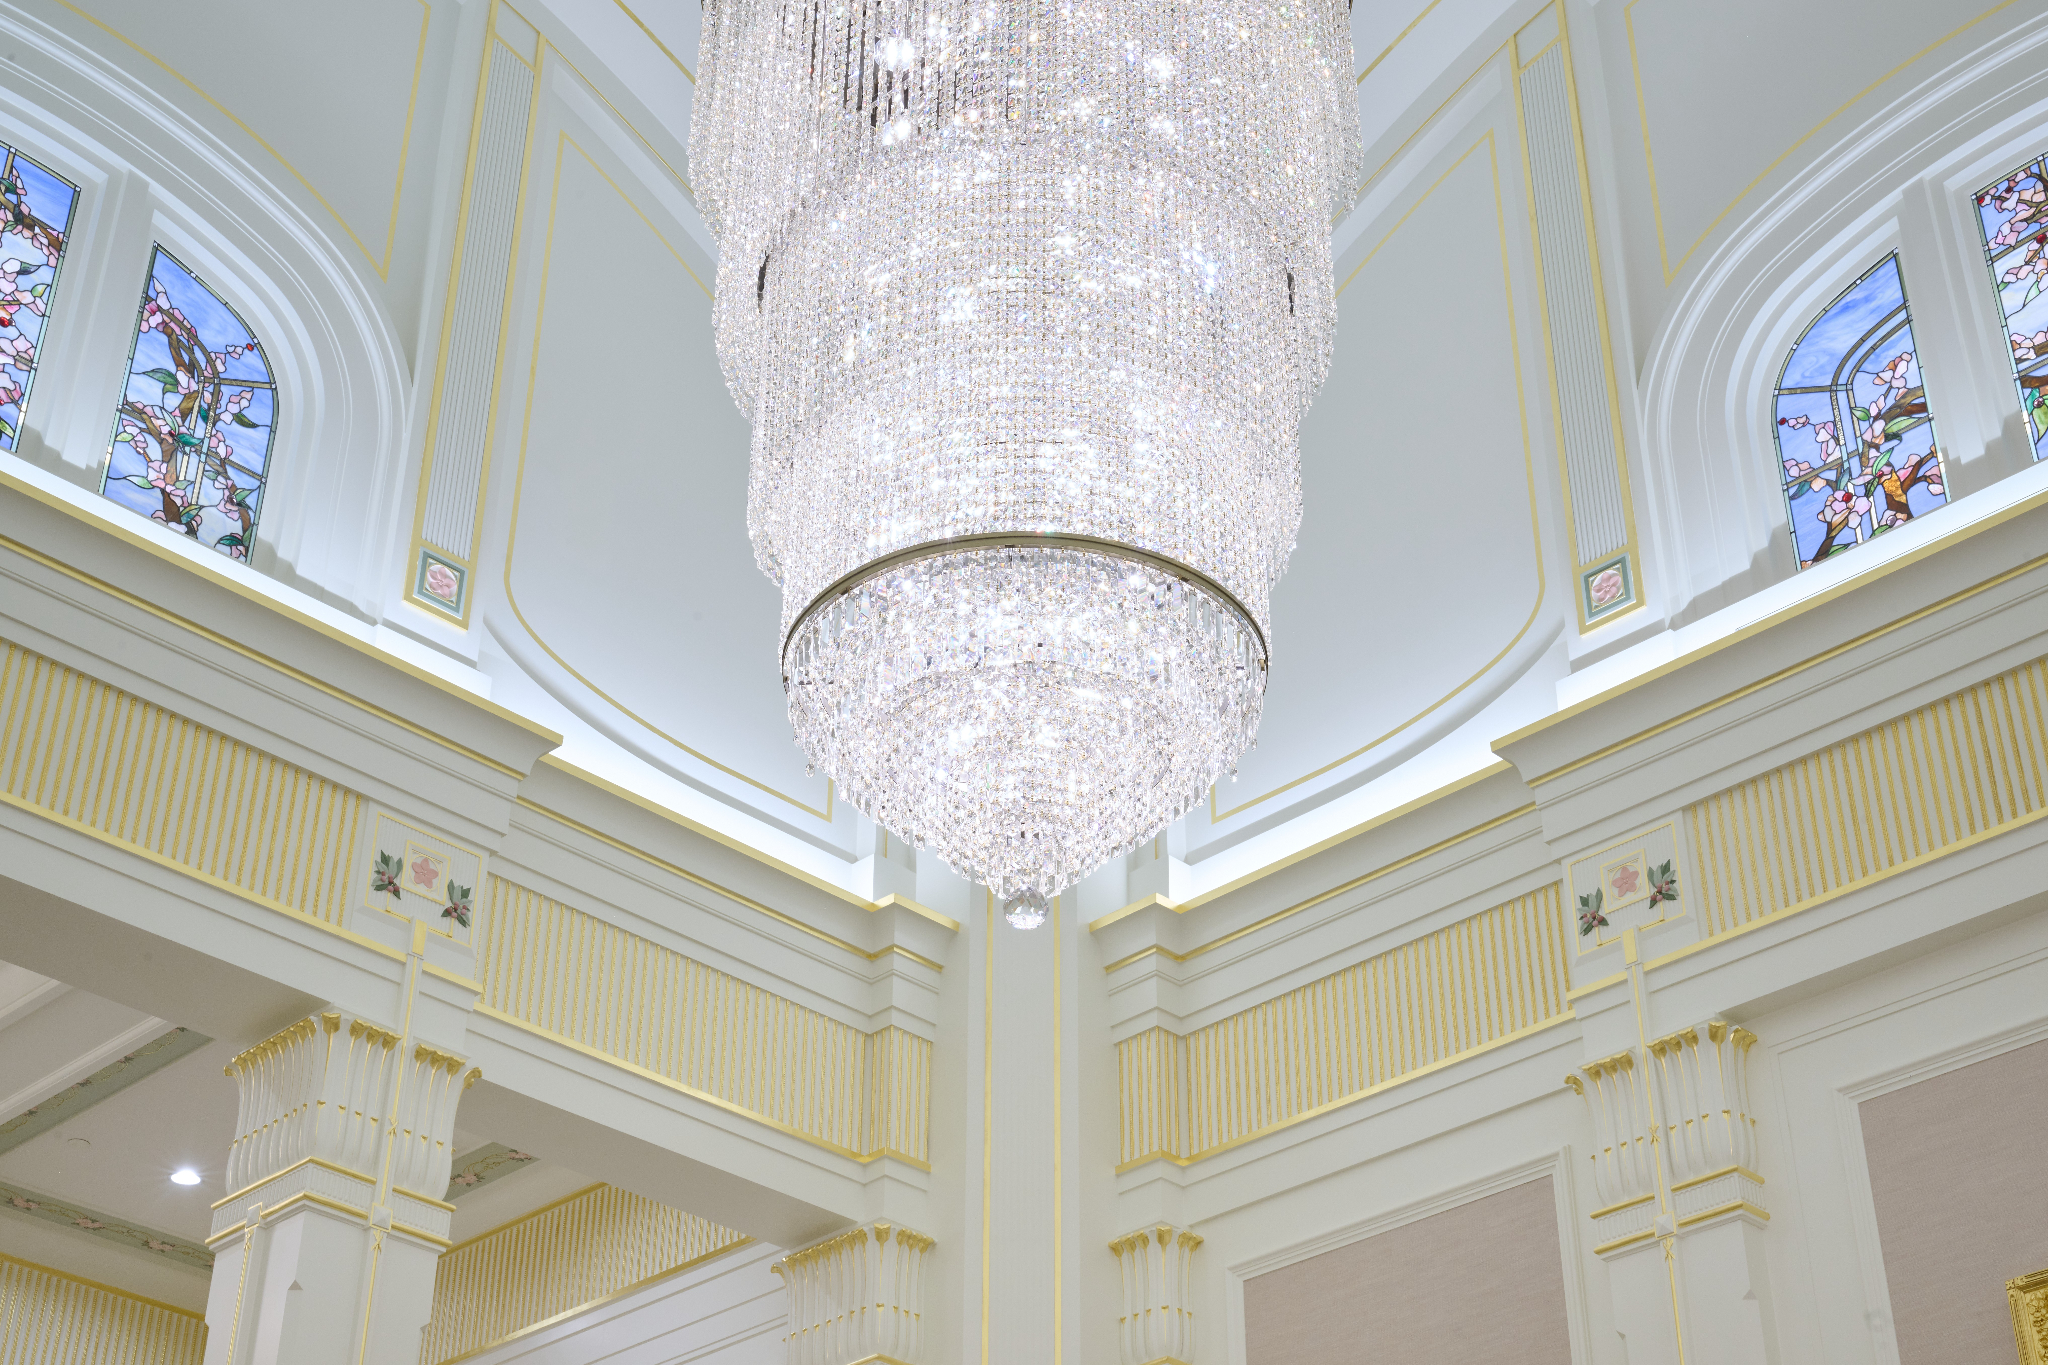 A large, clear chandelier hanging from a tall ceiling in a white room.